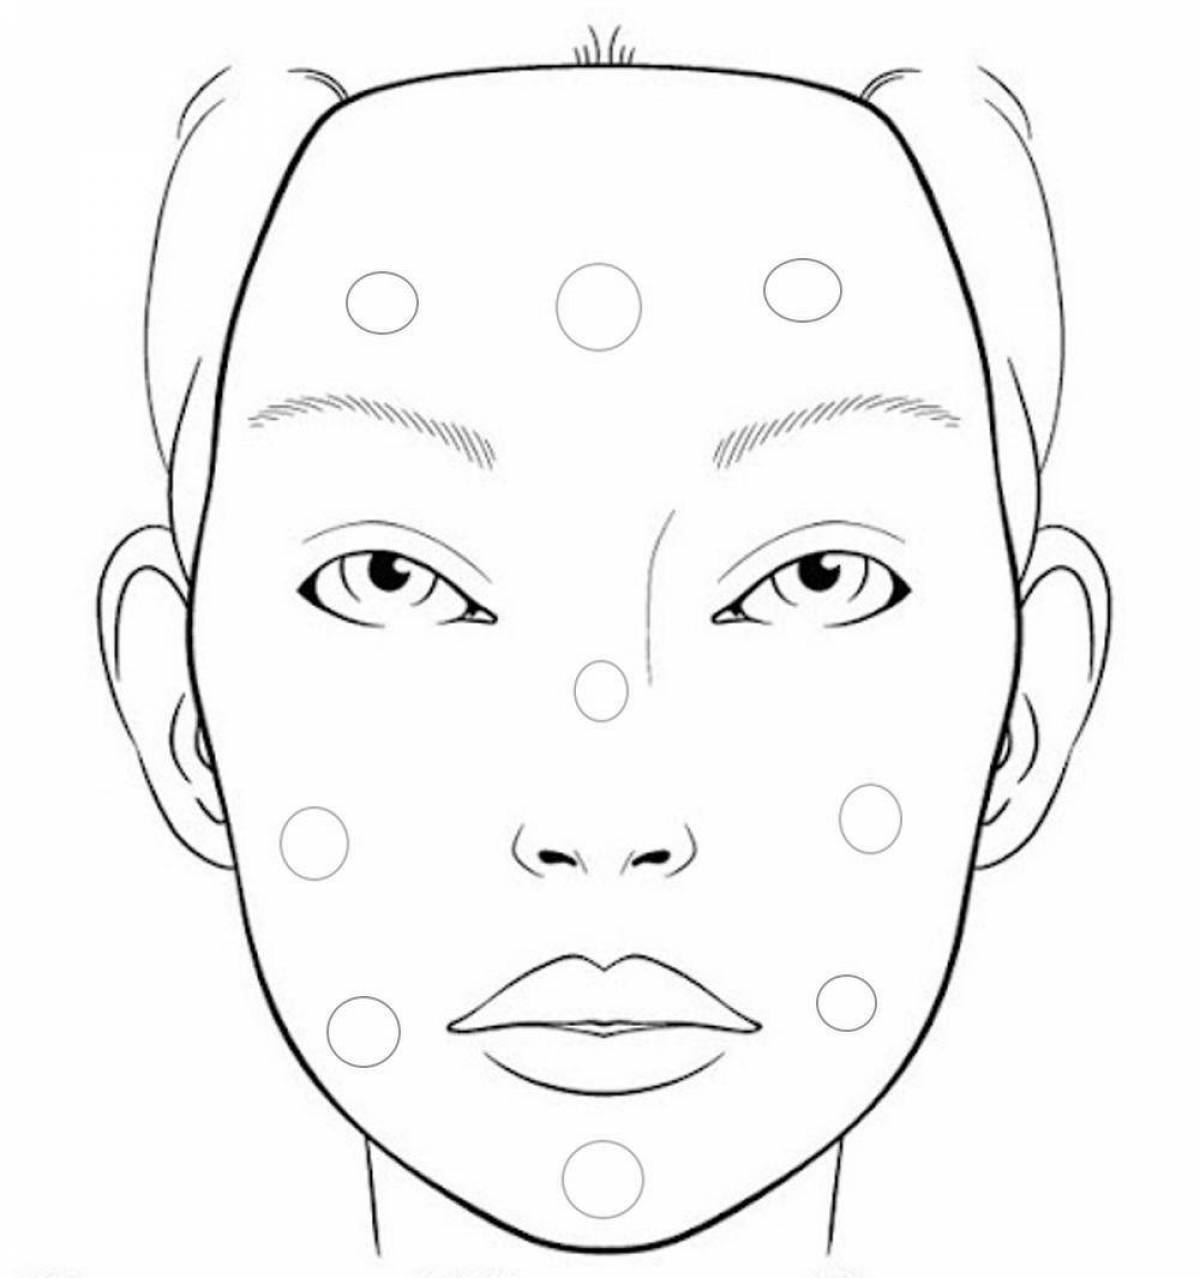 Coloring page of face with alluring makeup